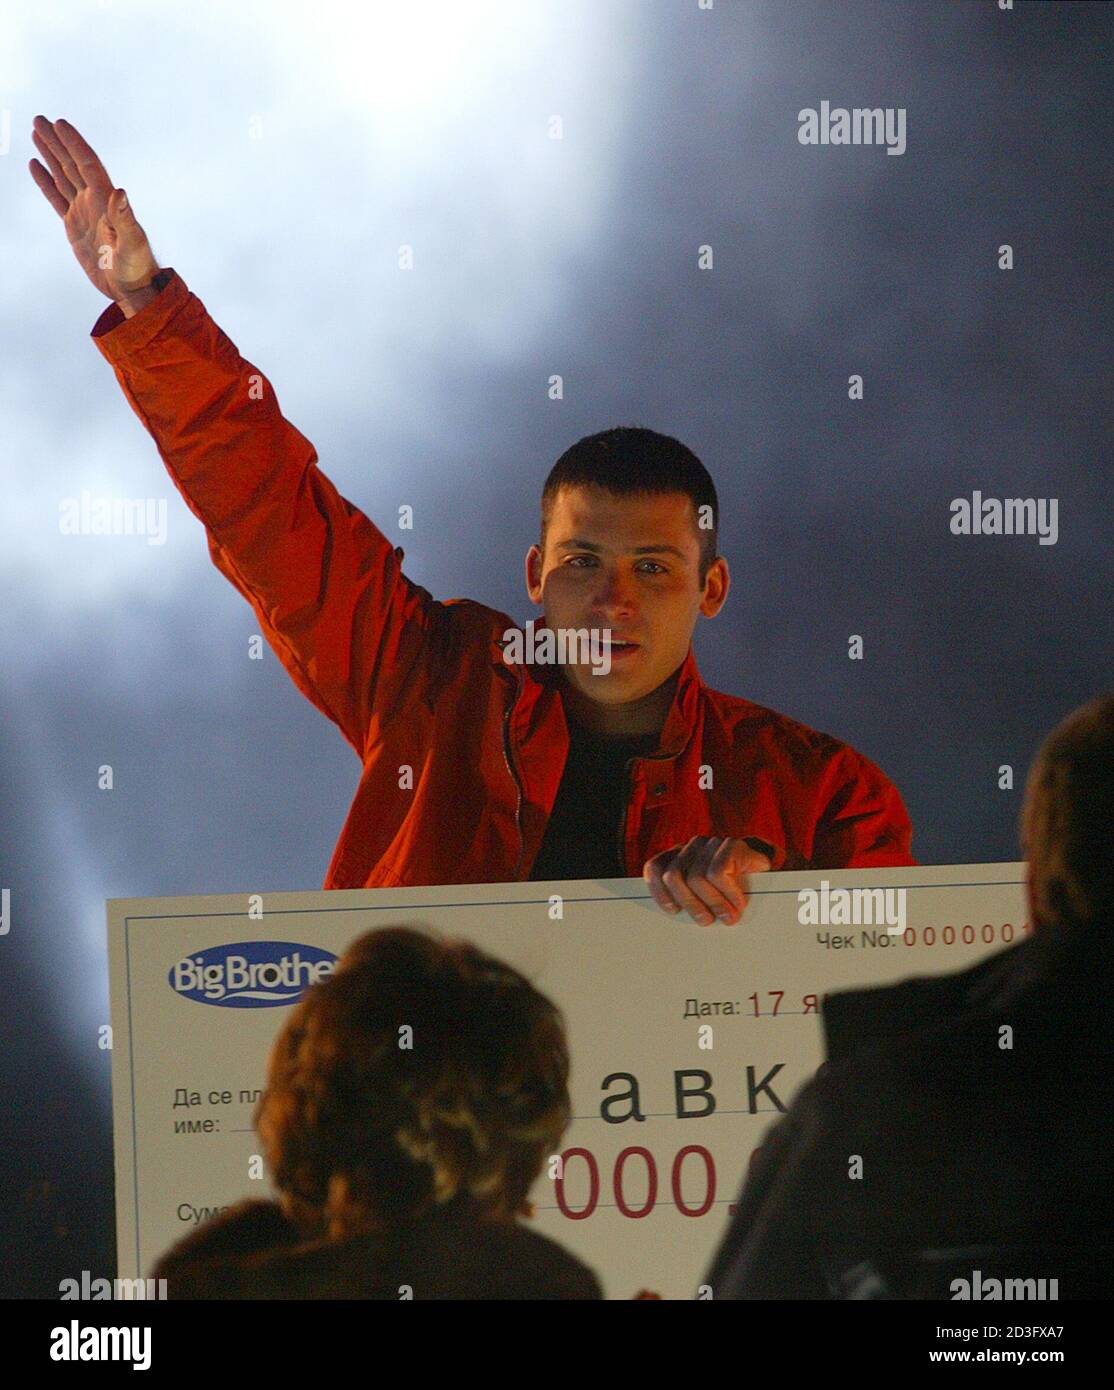 Zdravko Vasilev,27, reacts after winning the 'Big Brother' final in Sofia,  late January 17, 2005. Vasilev won the top prize of some 200,000 leva  (100,000 Euro). The reality show stormed to the